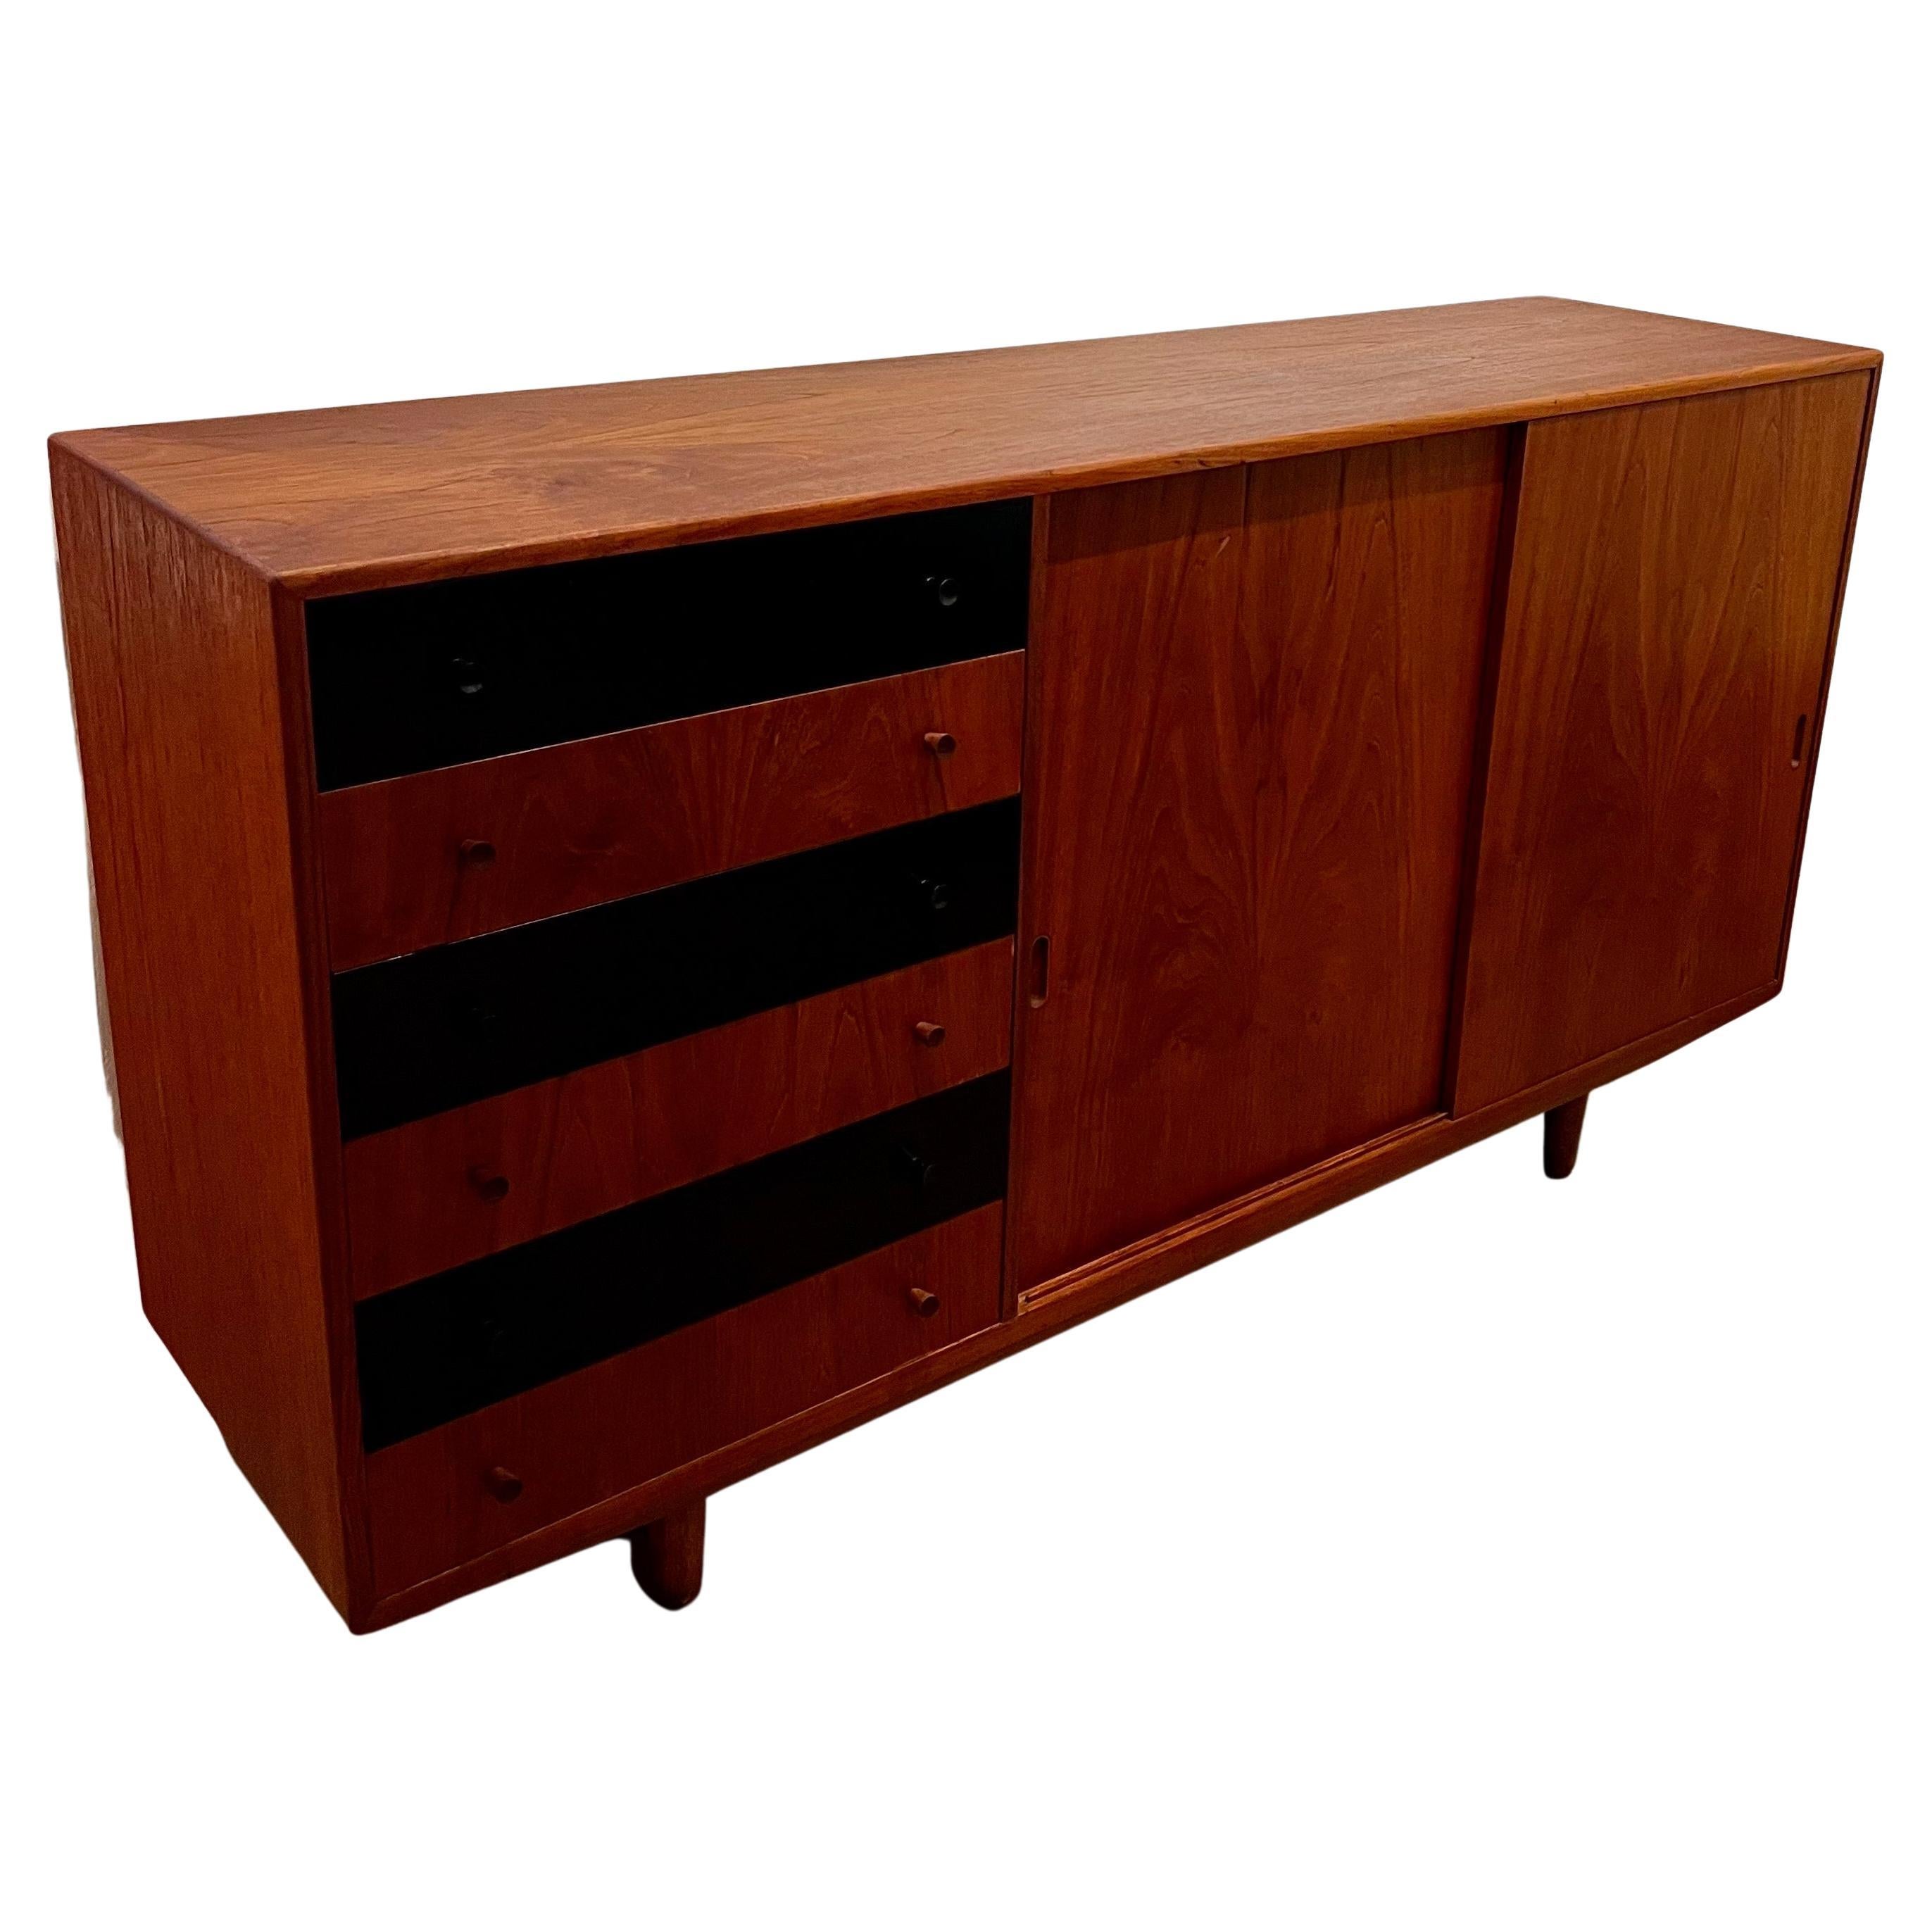 Beautiful massive large Danish teak credenza with solid oak tapered legs, dovetail drawers triple shelves, double sliding doors freshly refinished with 6 side drawers, 3 black lacquered beautiful storage piece.